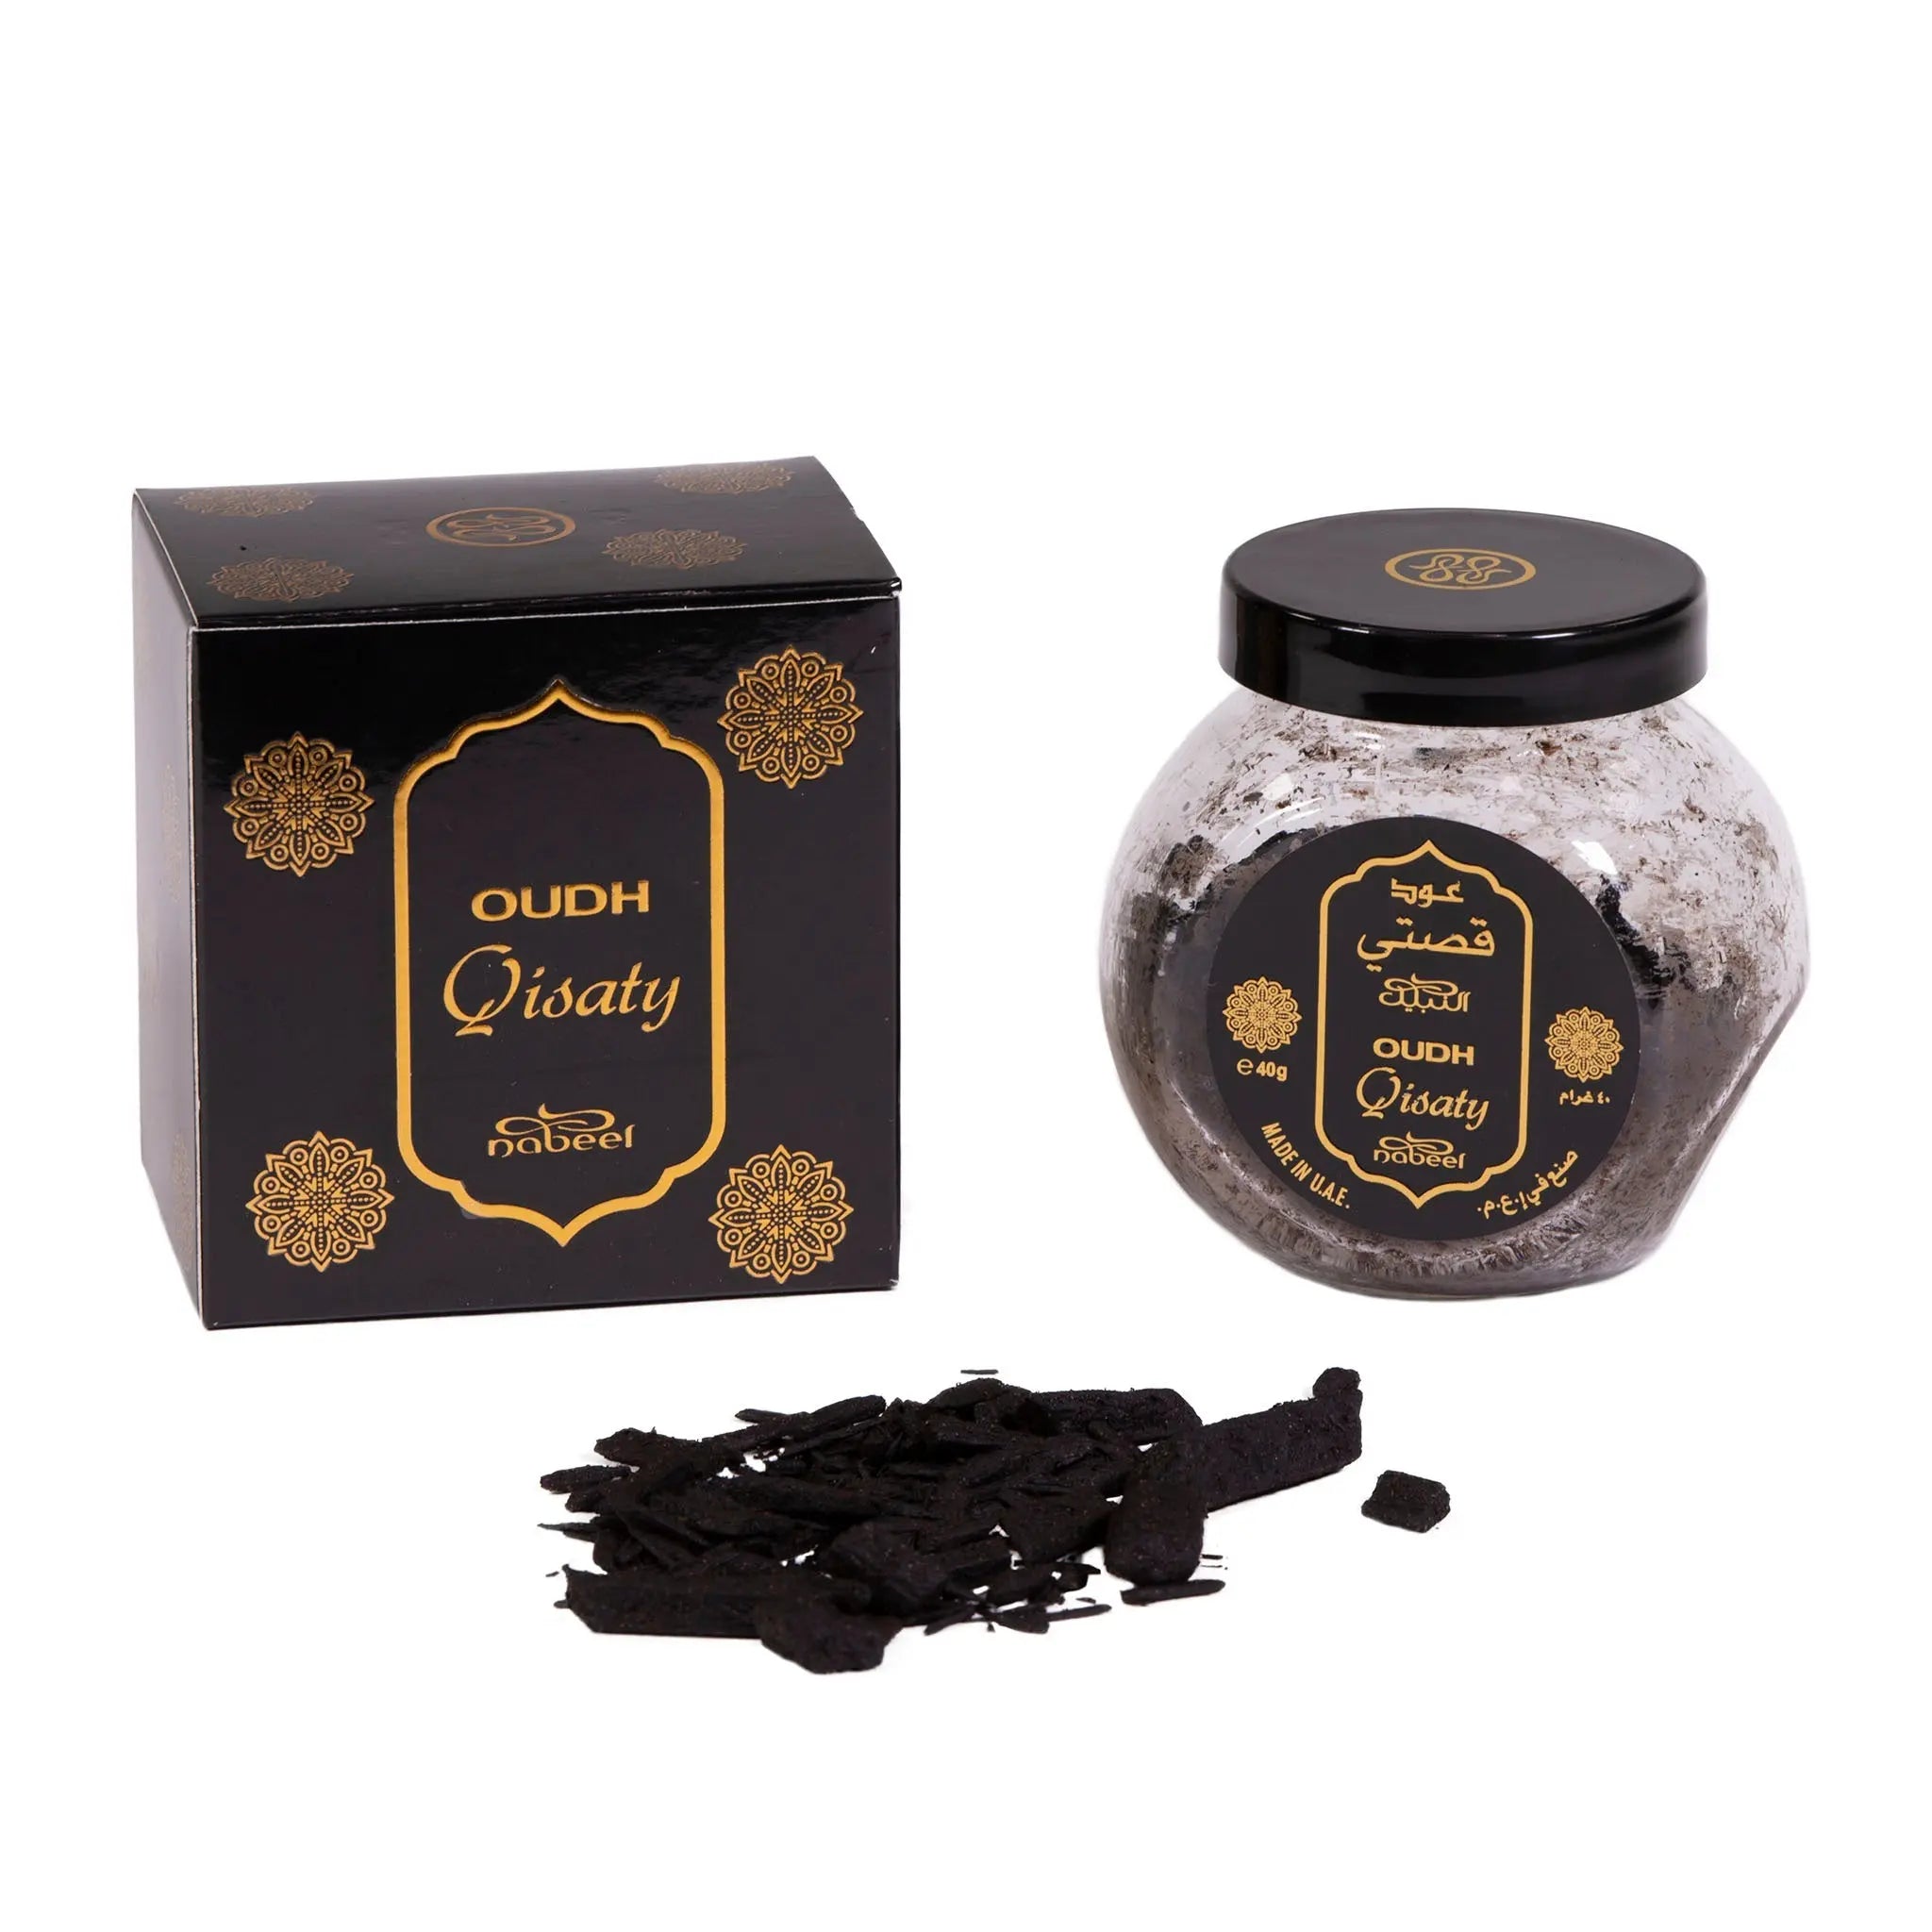 The image depicts "OUDH Qistaty" by Nabeel, presented with a black box and a clear glass jar, both adorned with gold floral accents and branding. The product name is displayed in both Arabic and English on a gold label. In front of the jar lies a scattered pile of dark, resinous oudh chips, which are used for their fragrant properties. The black lid of the jar matches the box, and both feature the Nabeel logo.